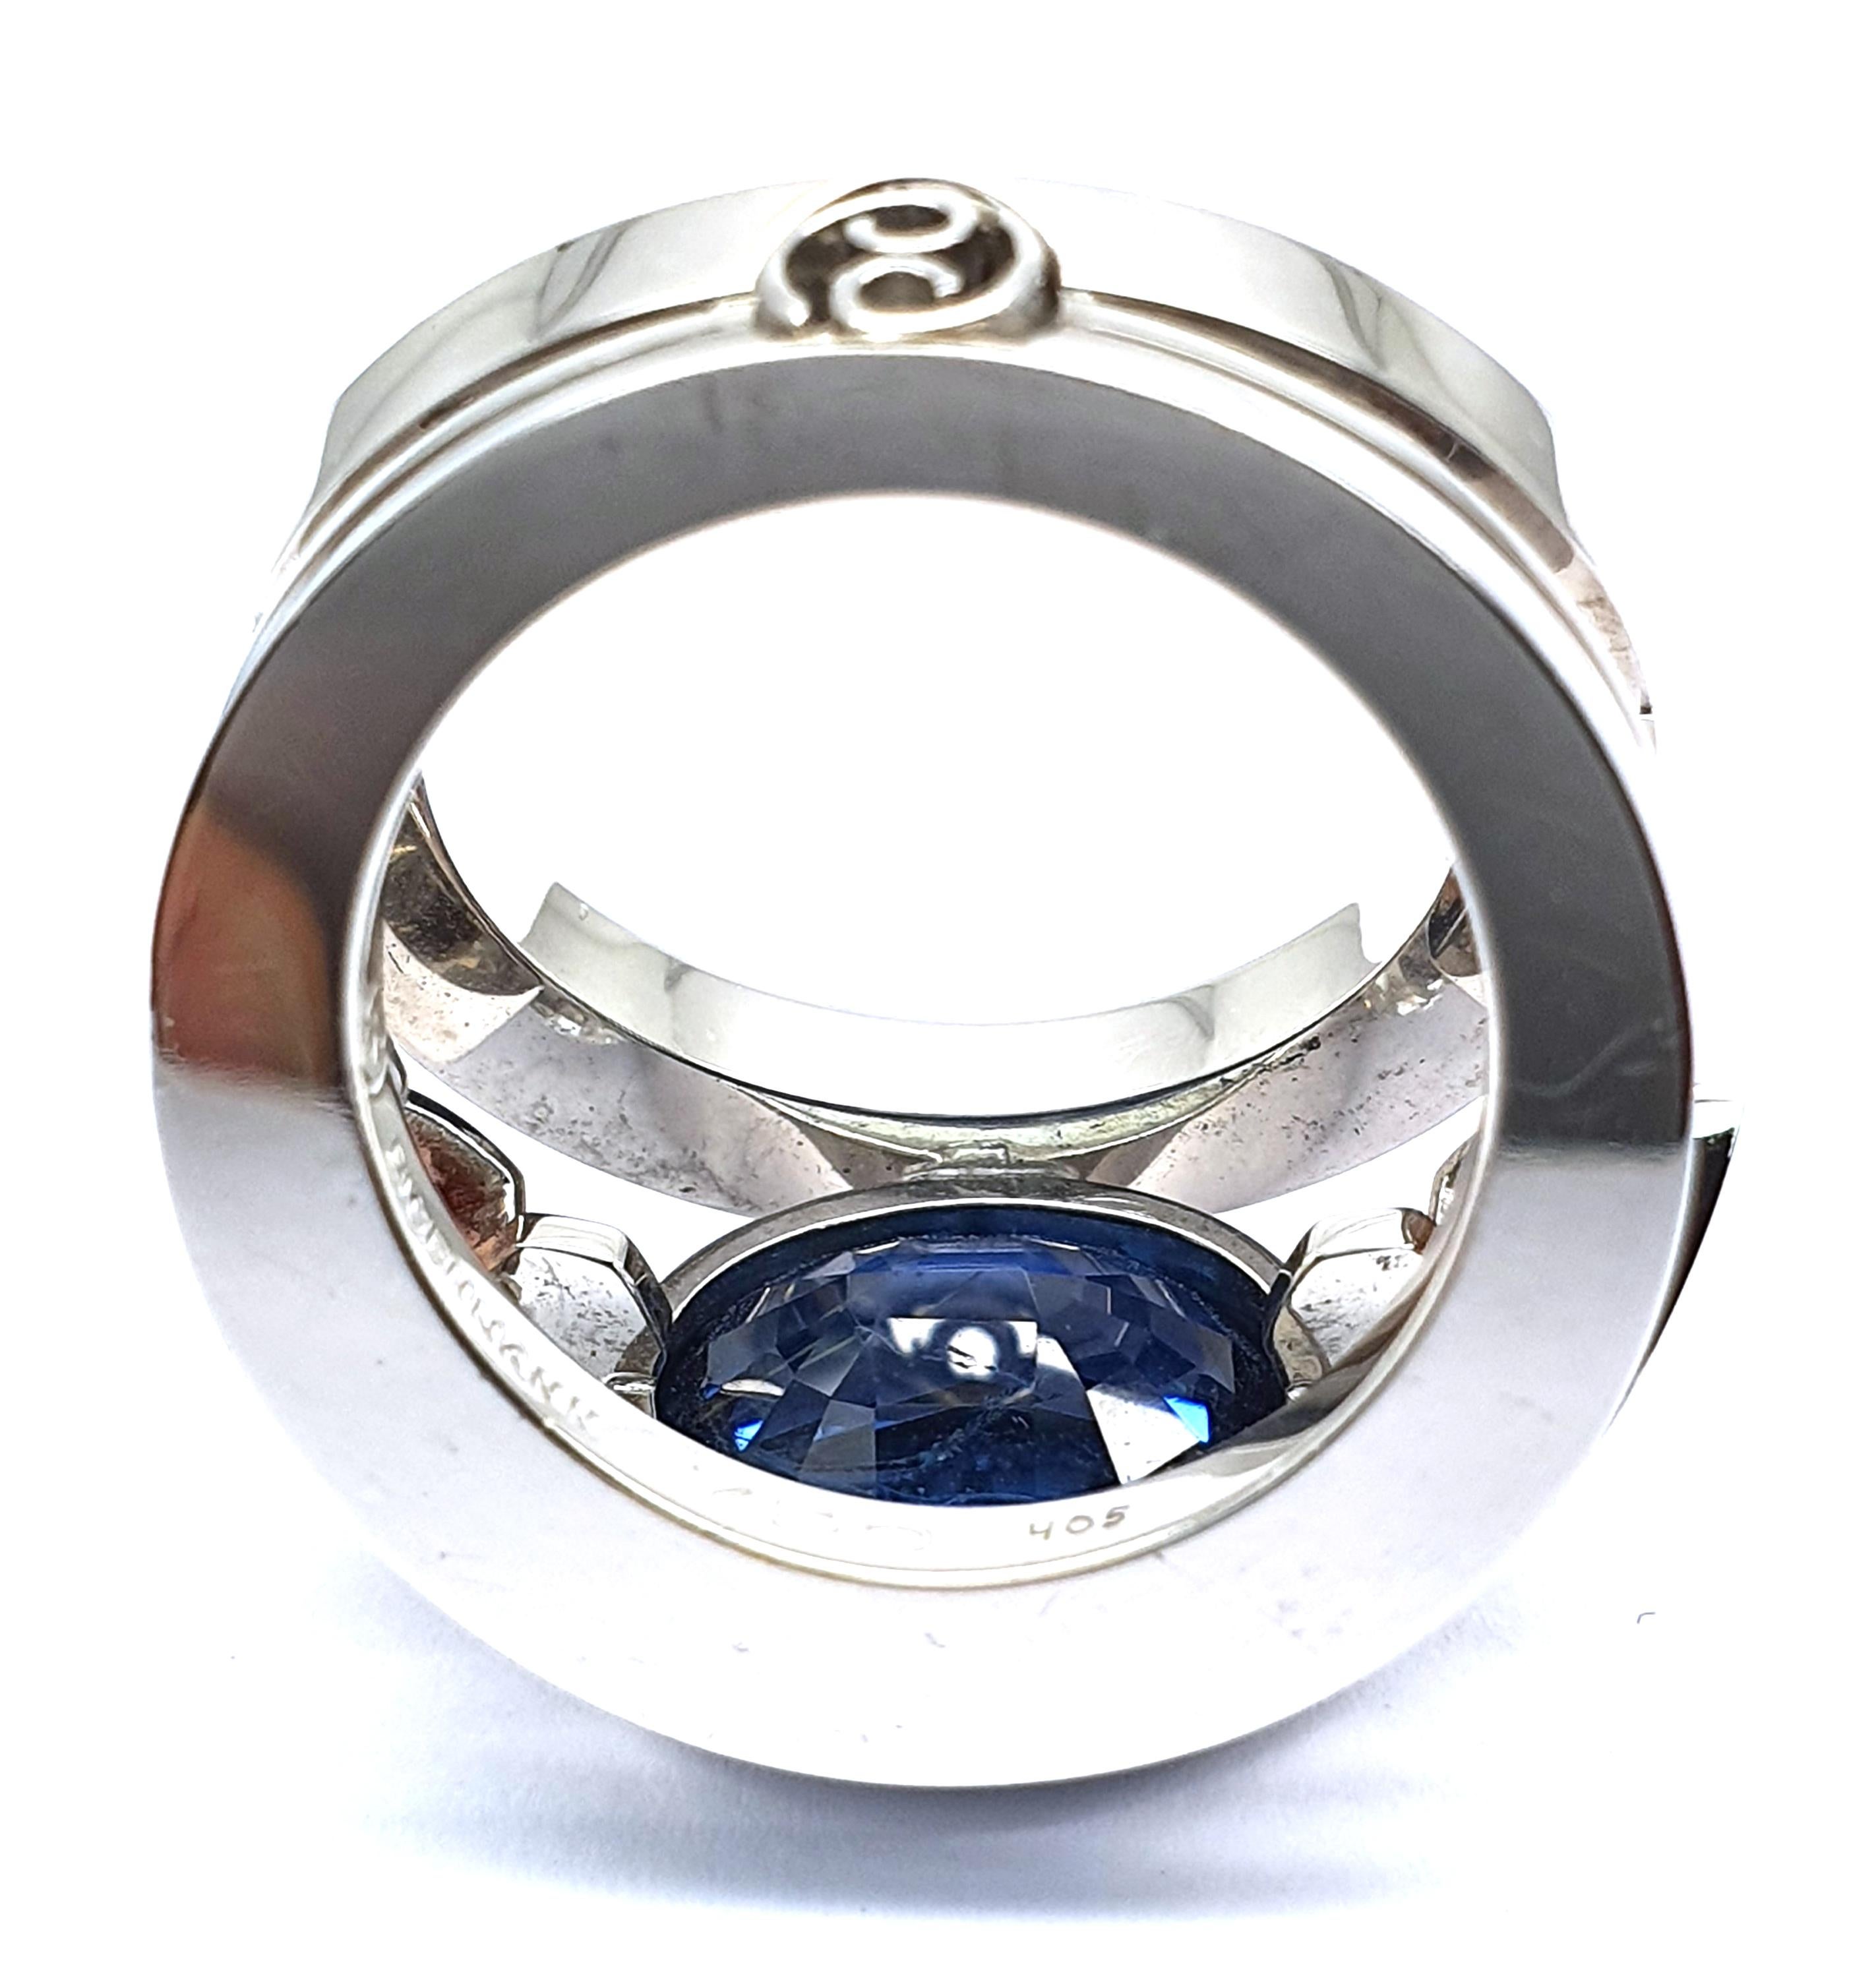 Certified 9.45 Carat Intense Blue Sapphire 2 Orange Corunds and 56 Diamonds Ring For Sale 1